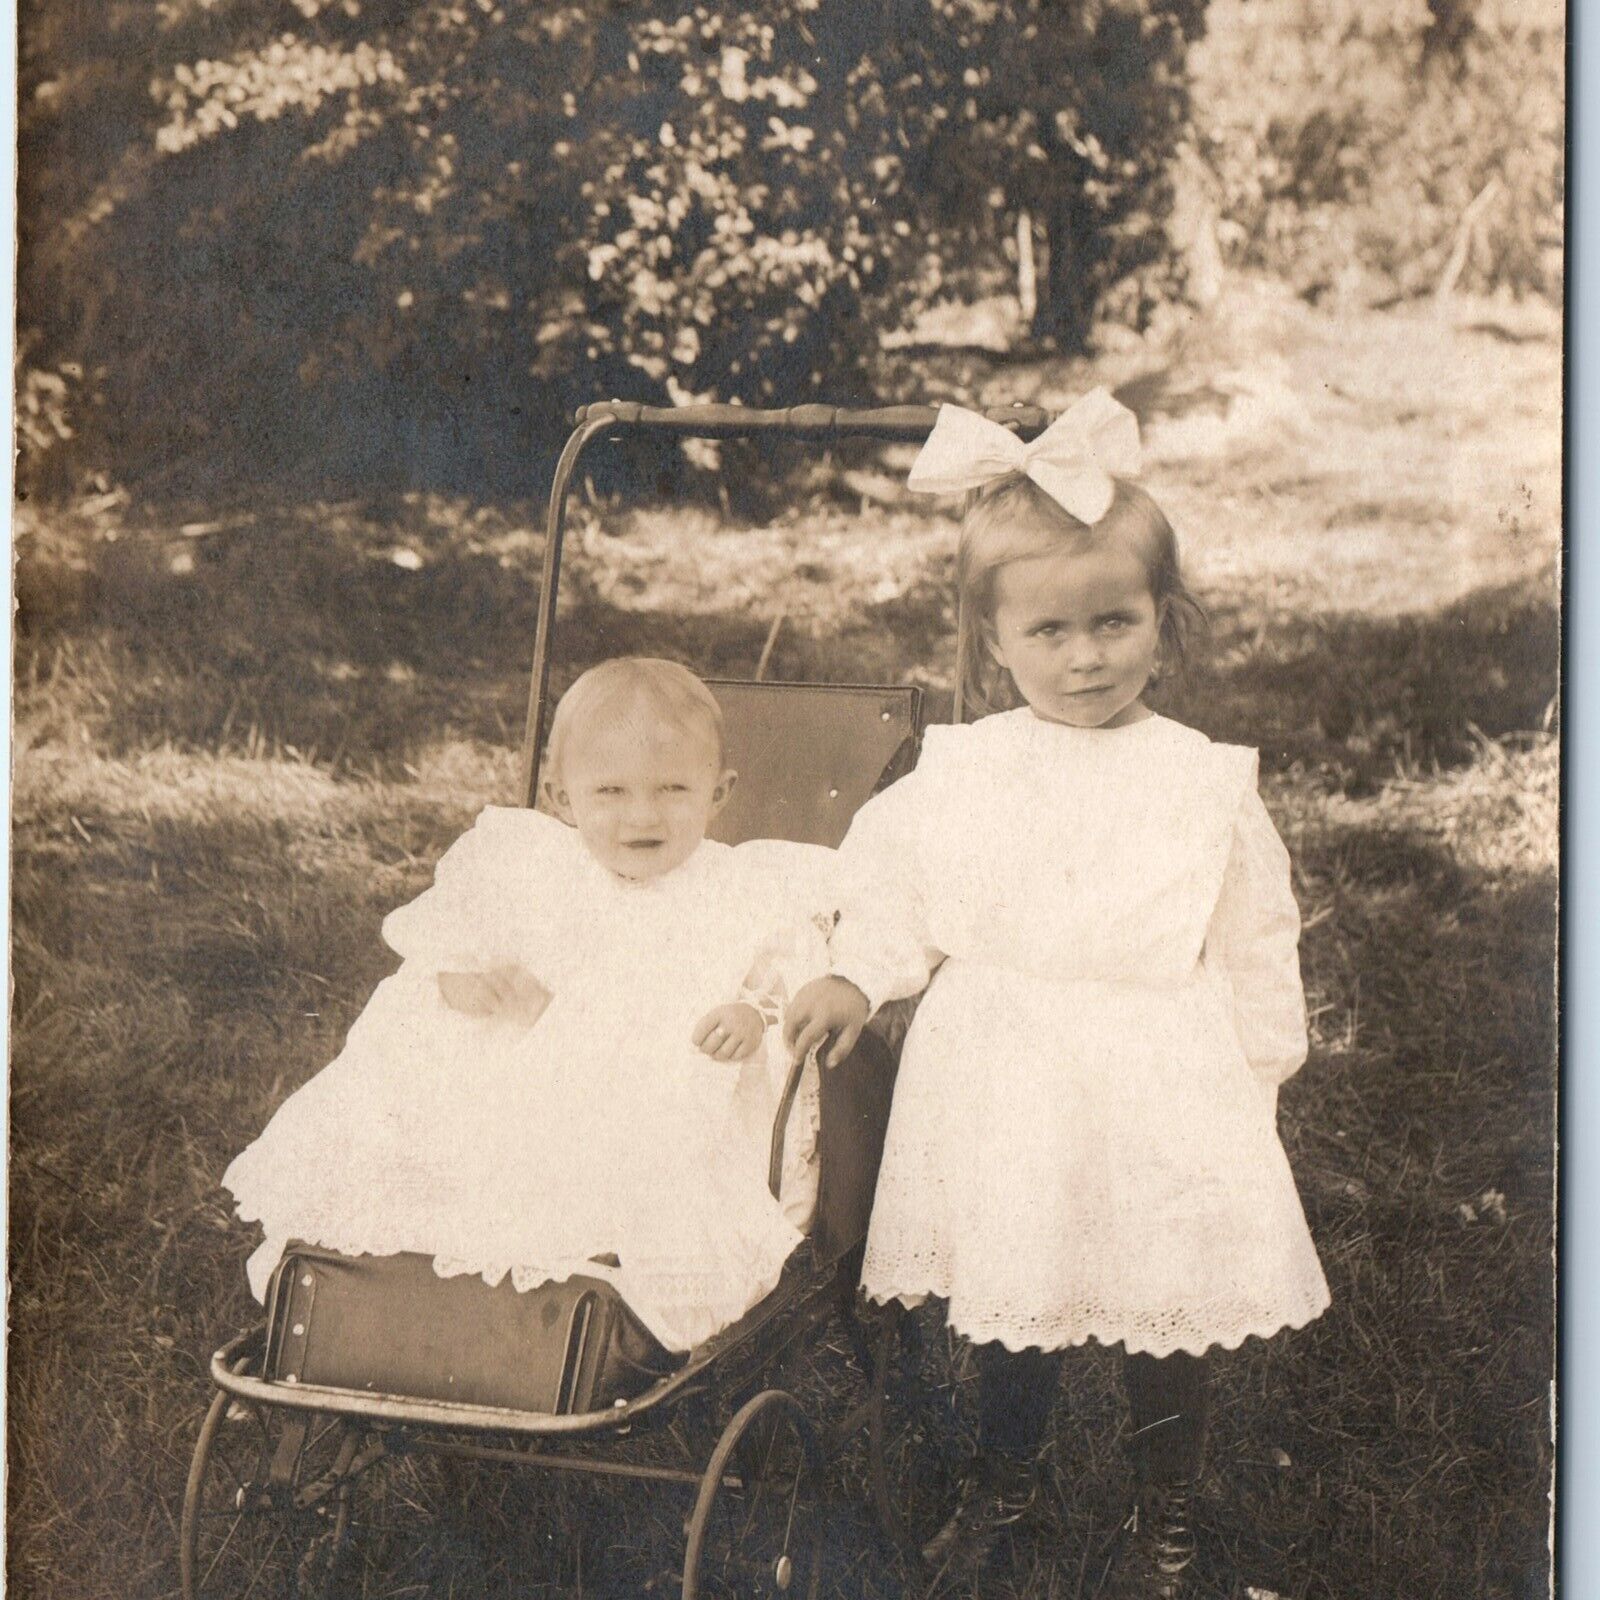 c1910s Adorable RPPC Little Girl w/ Baby Stroller Real Photo Cute Bow Laugh A171